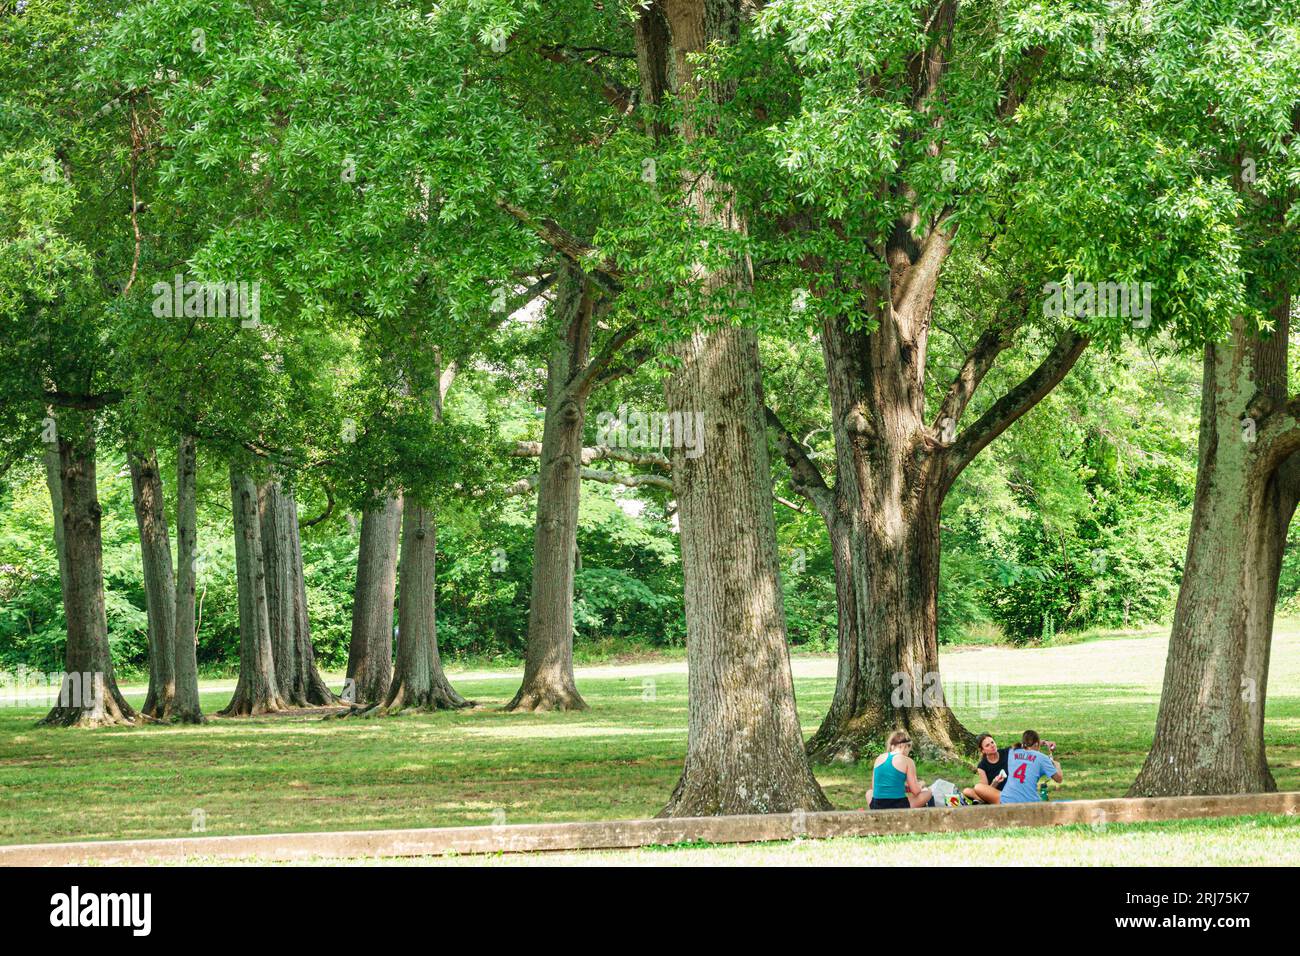 Charlotte North Carolina,Eastover Park,willow oak trees,picnic woman women lady female,adults residents Stock Photo